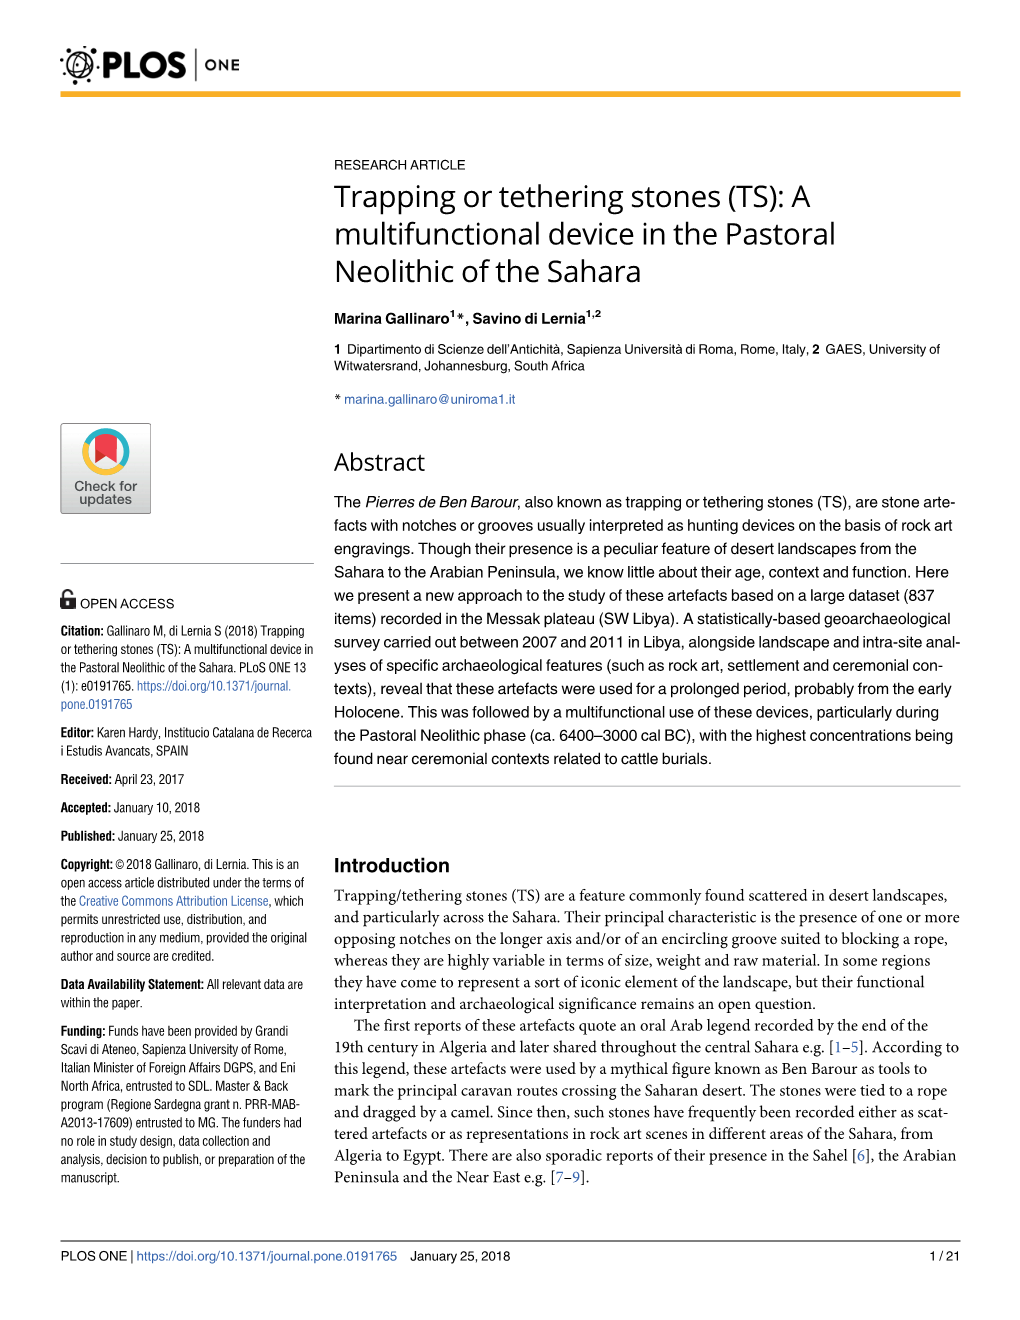 Trapping Or Tethering Stones (TS): a Multifunctional Device in the Pastoral Neolithic of the Sahara